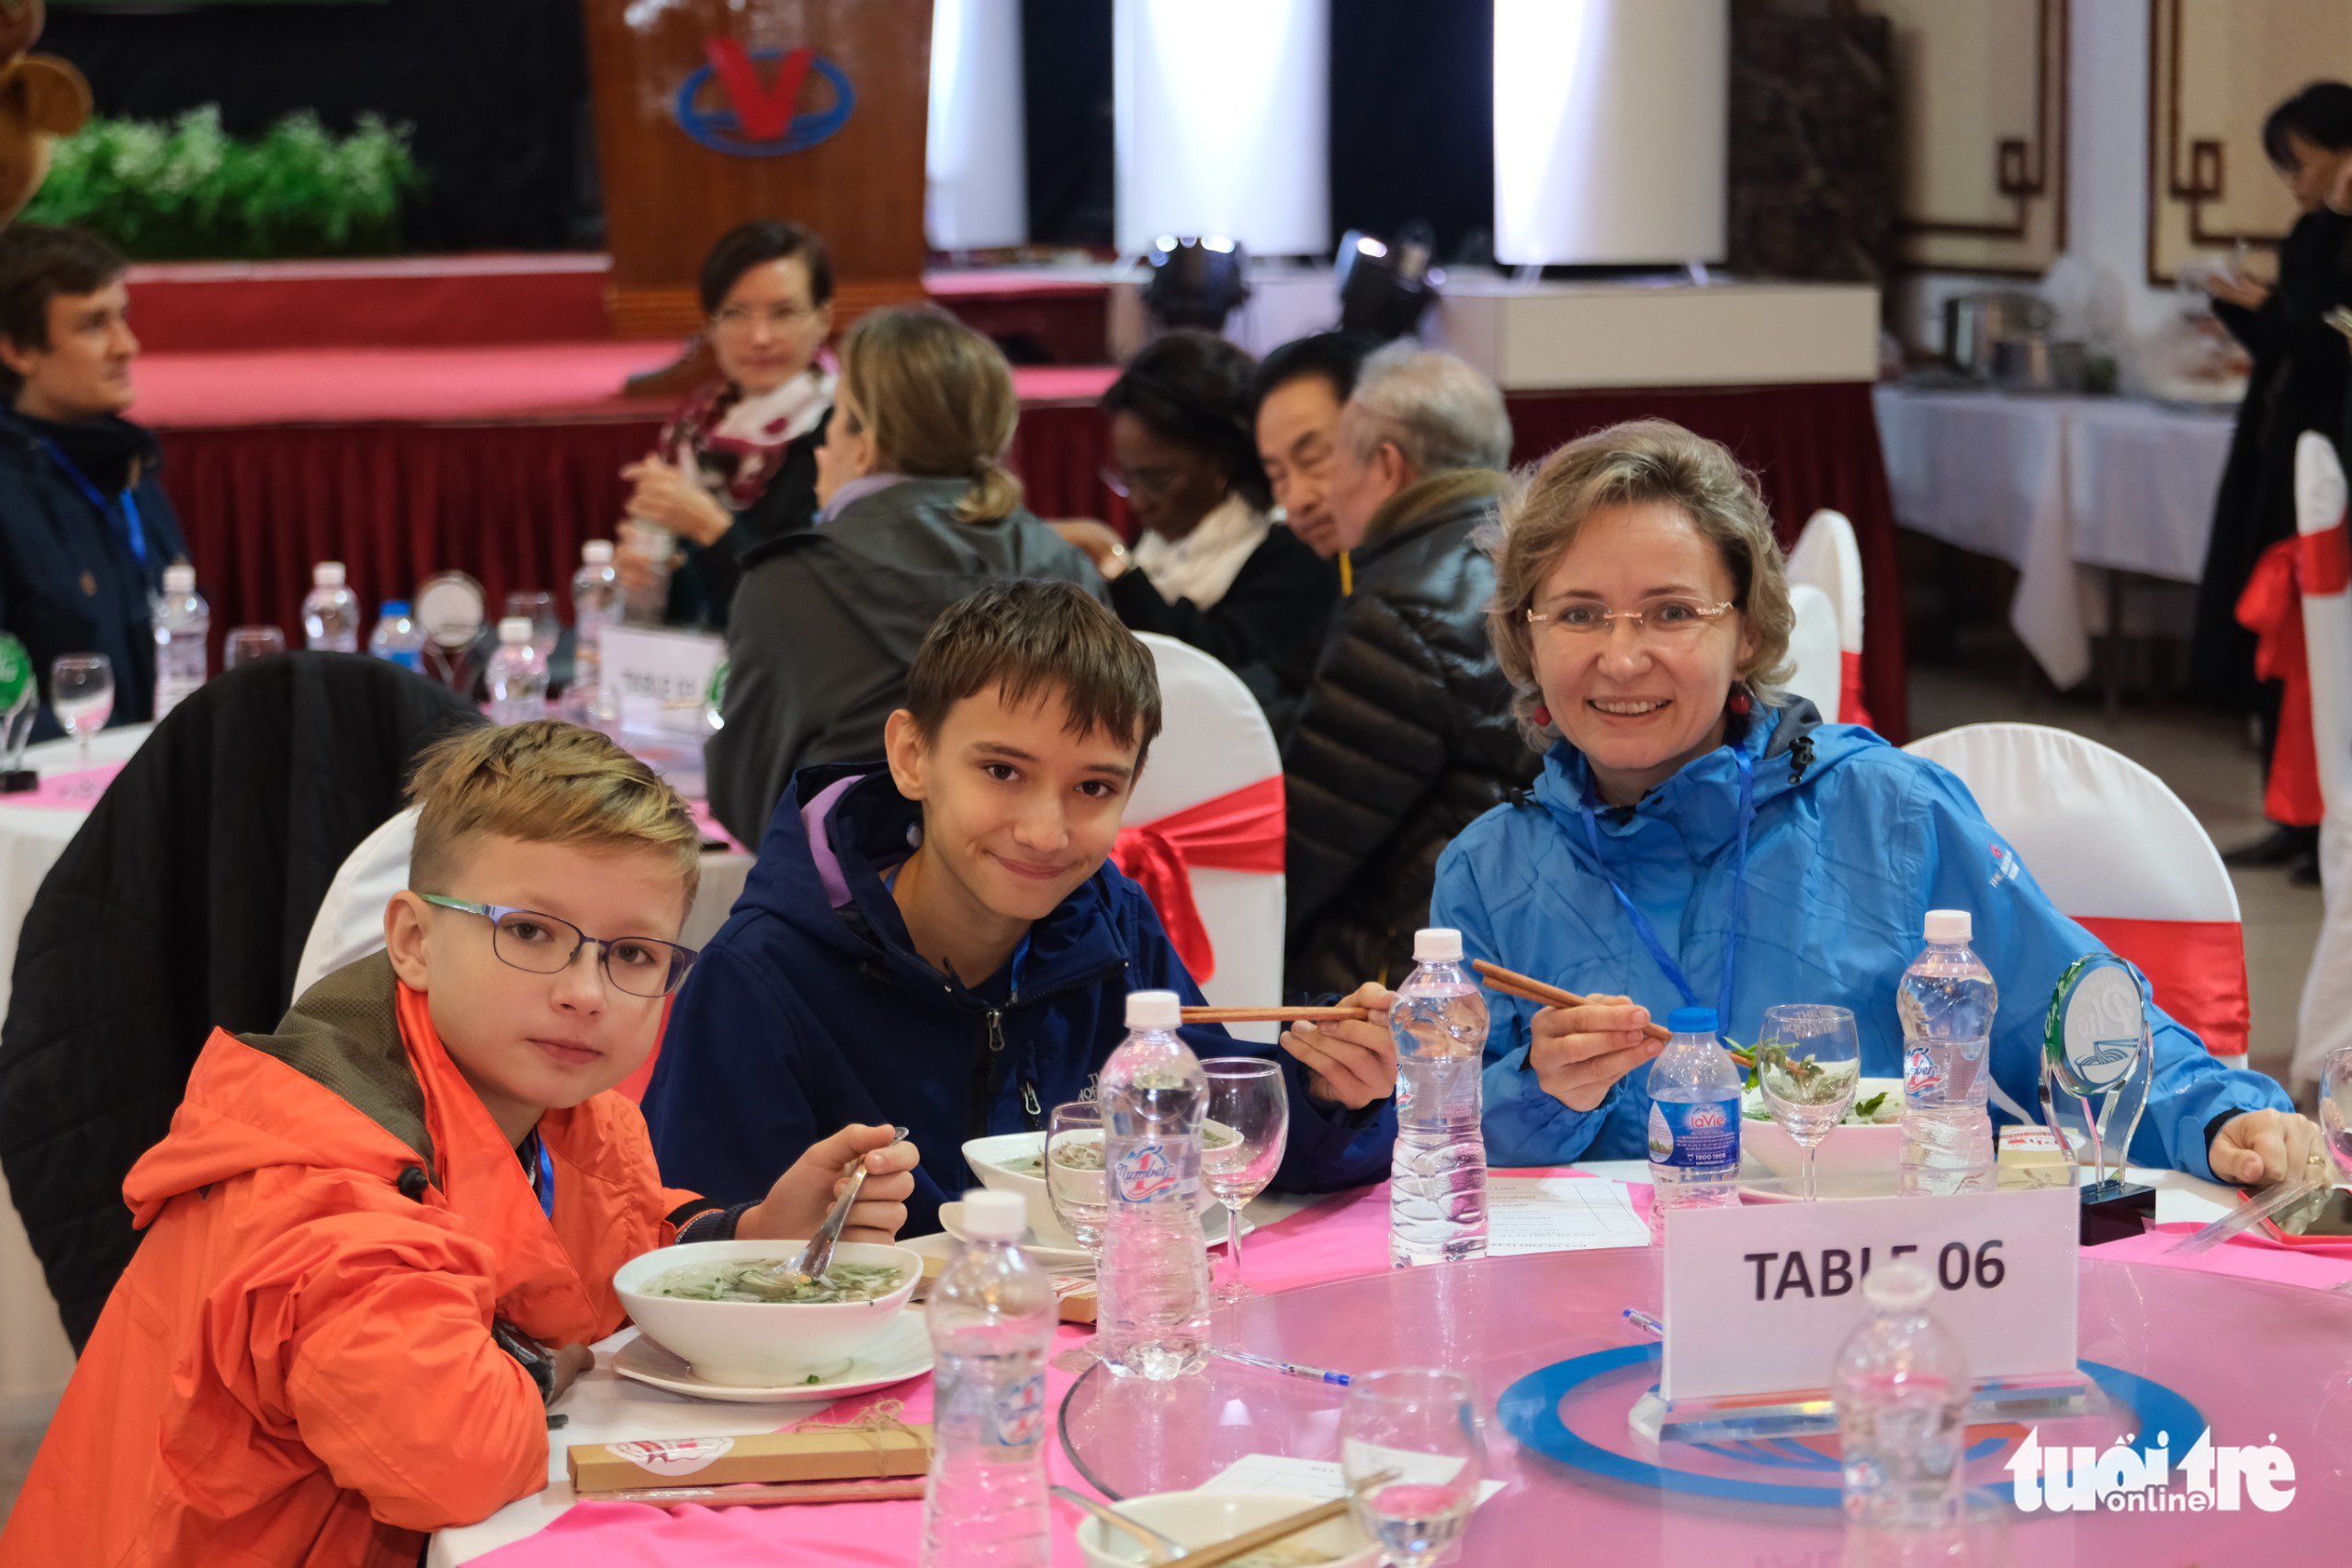 vana Judiakova (R), head of the Consular and Visa Department at the Embassy of the Republic of Slovakia in Vietnam, and her sons experience pho at the Day of Pho event organized by Tuoi Tre (Youth) newspaper in Nam Dinh Province, Vietnam, December 10, 2022. Photo: Nam Tran / Tuoi Tre